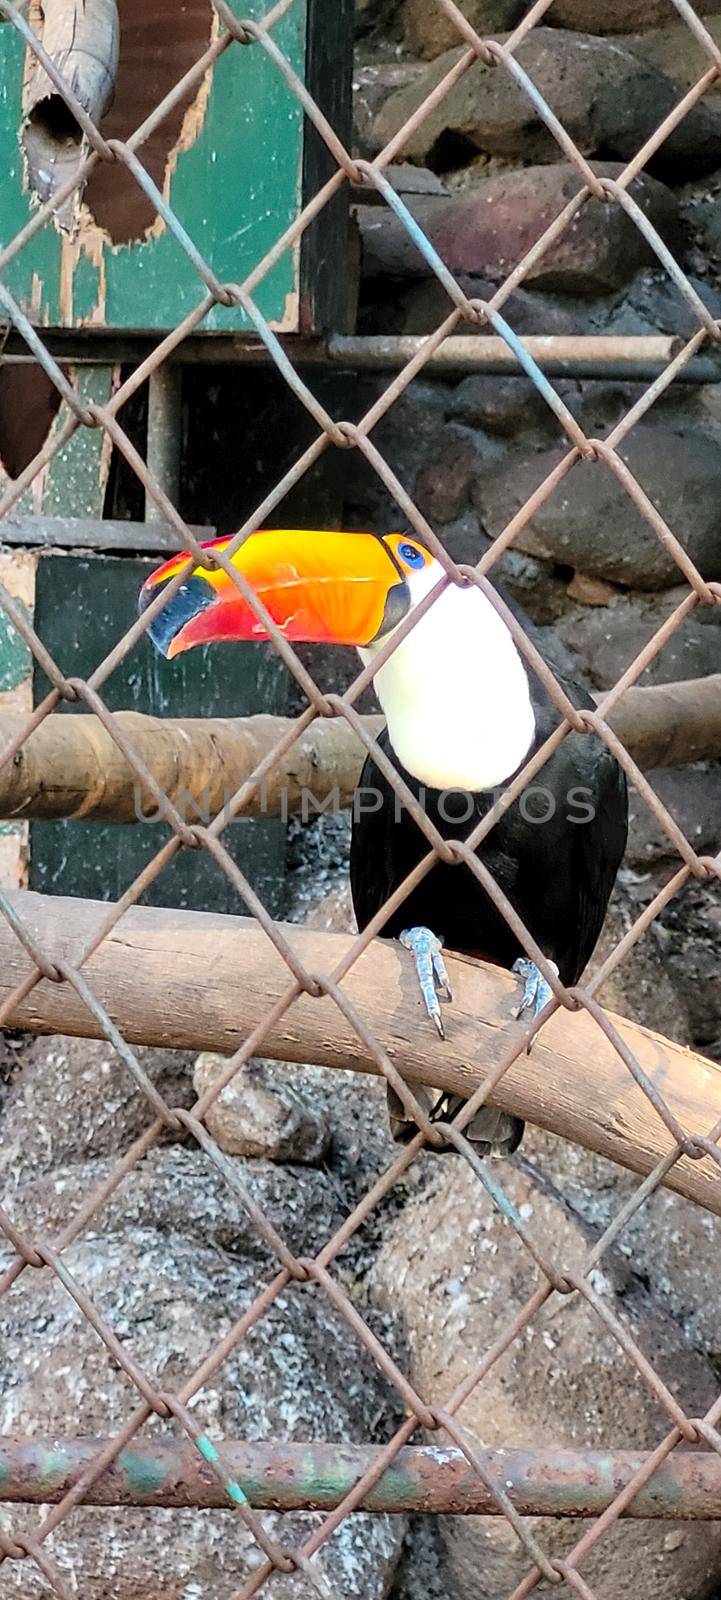 Brazilian toucan on a keeper in the interior of Brazil by sarsa